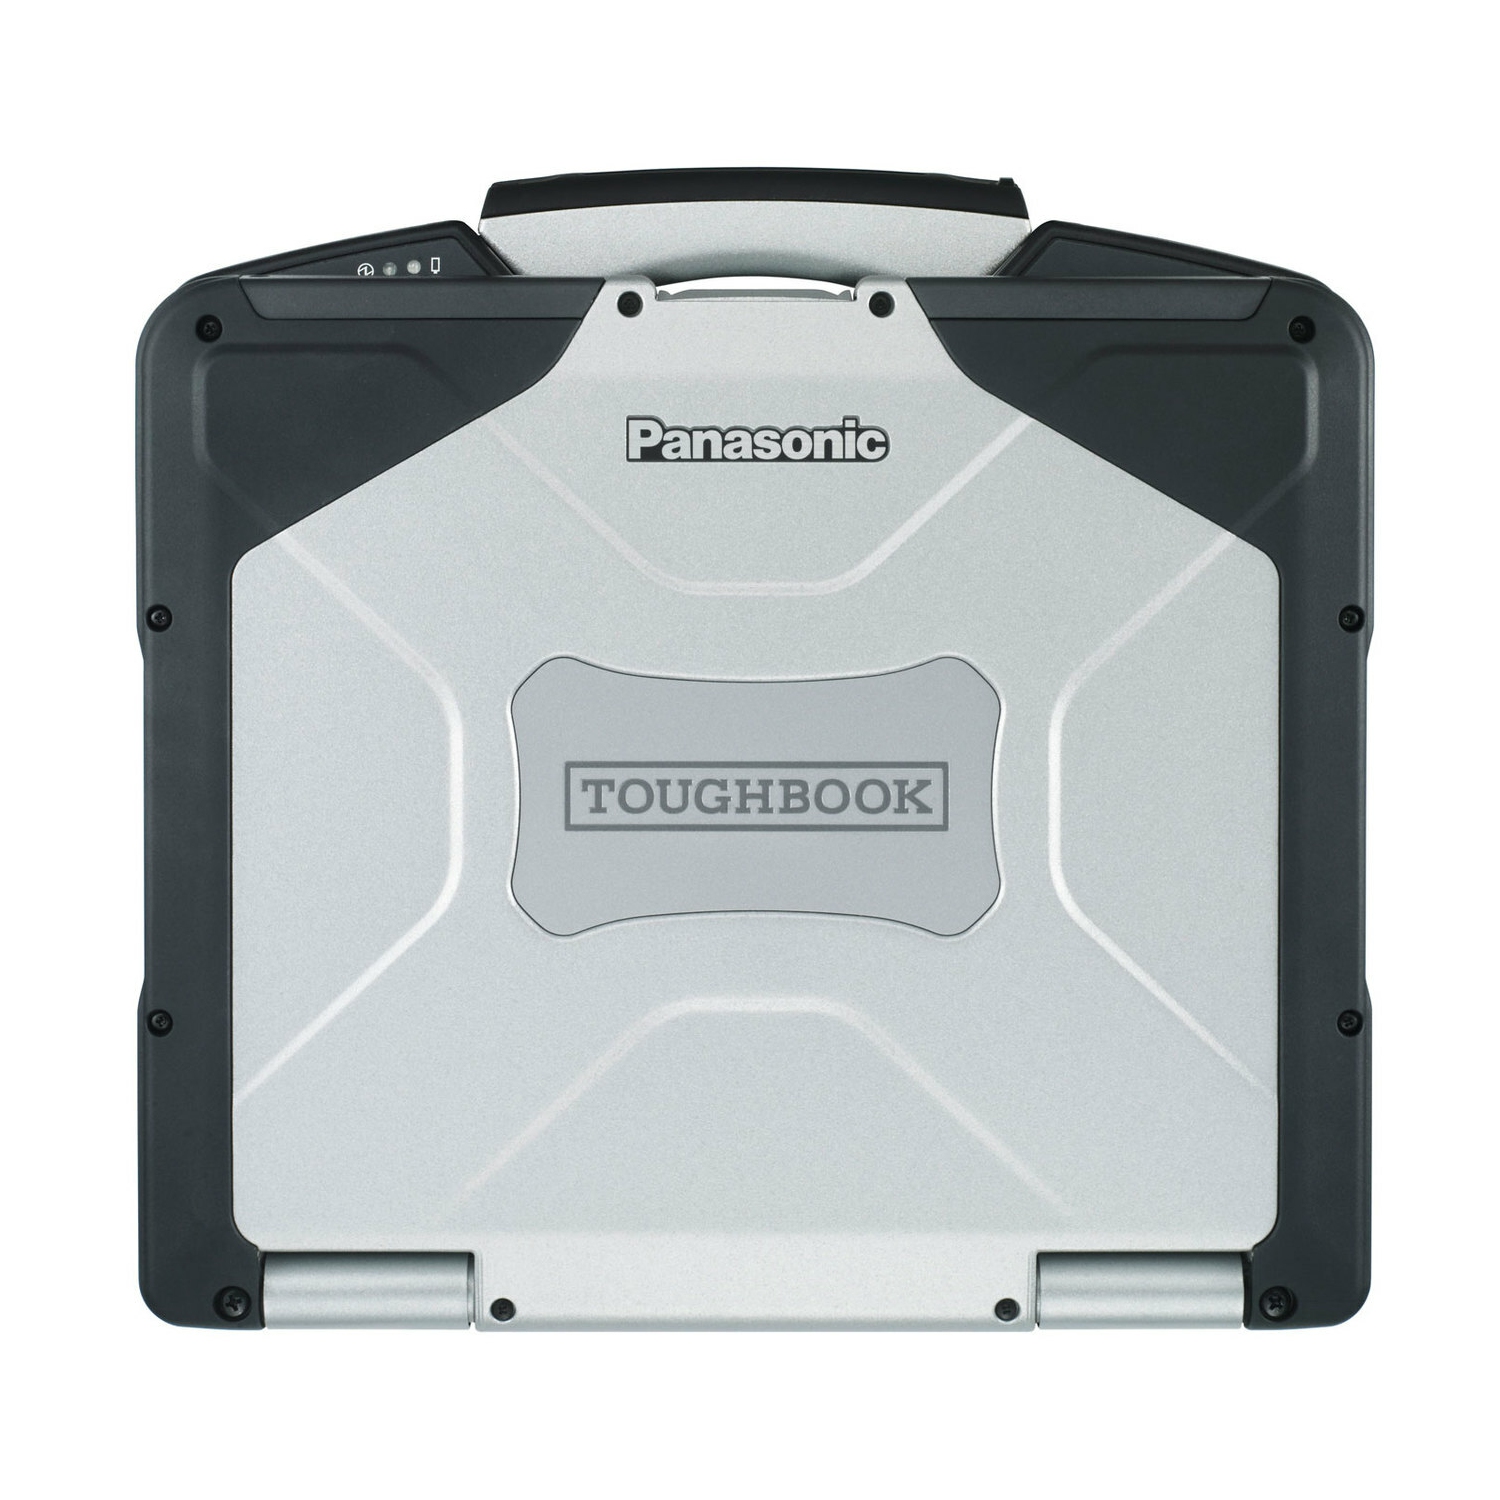 Refurbished (Excellent) - Panasonic Toughbook CF-31 MK3 Fully Rugged 2.6GHz Intel Core i5, BASIC - Grade A